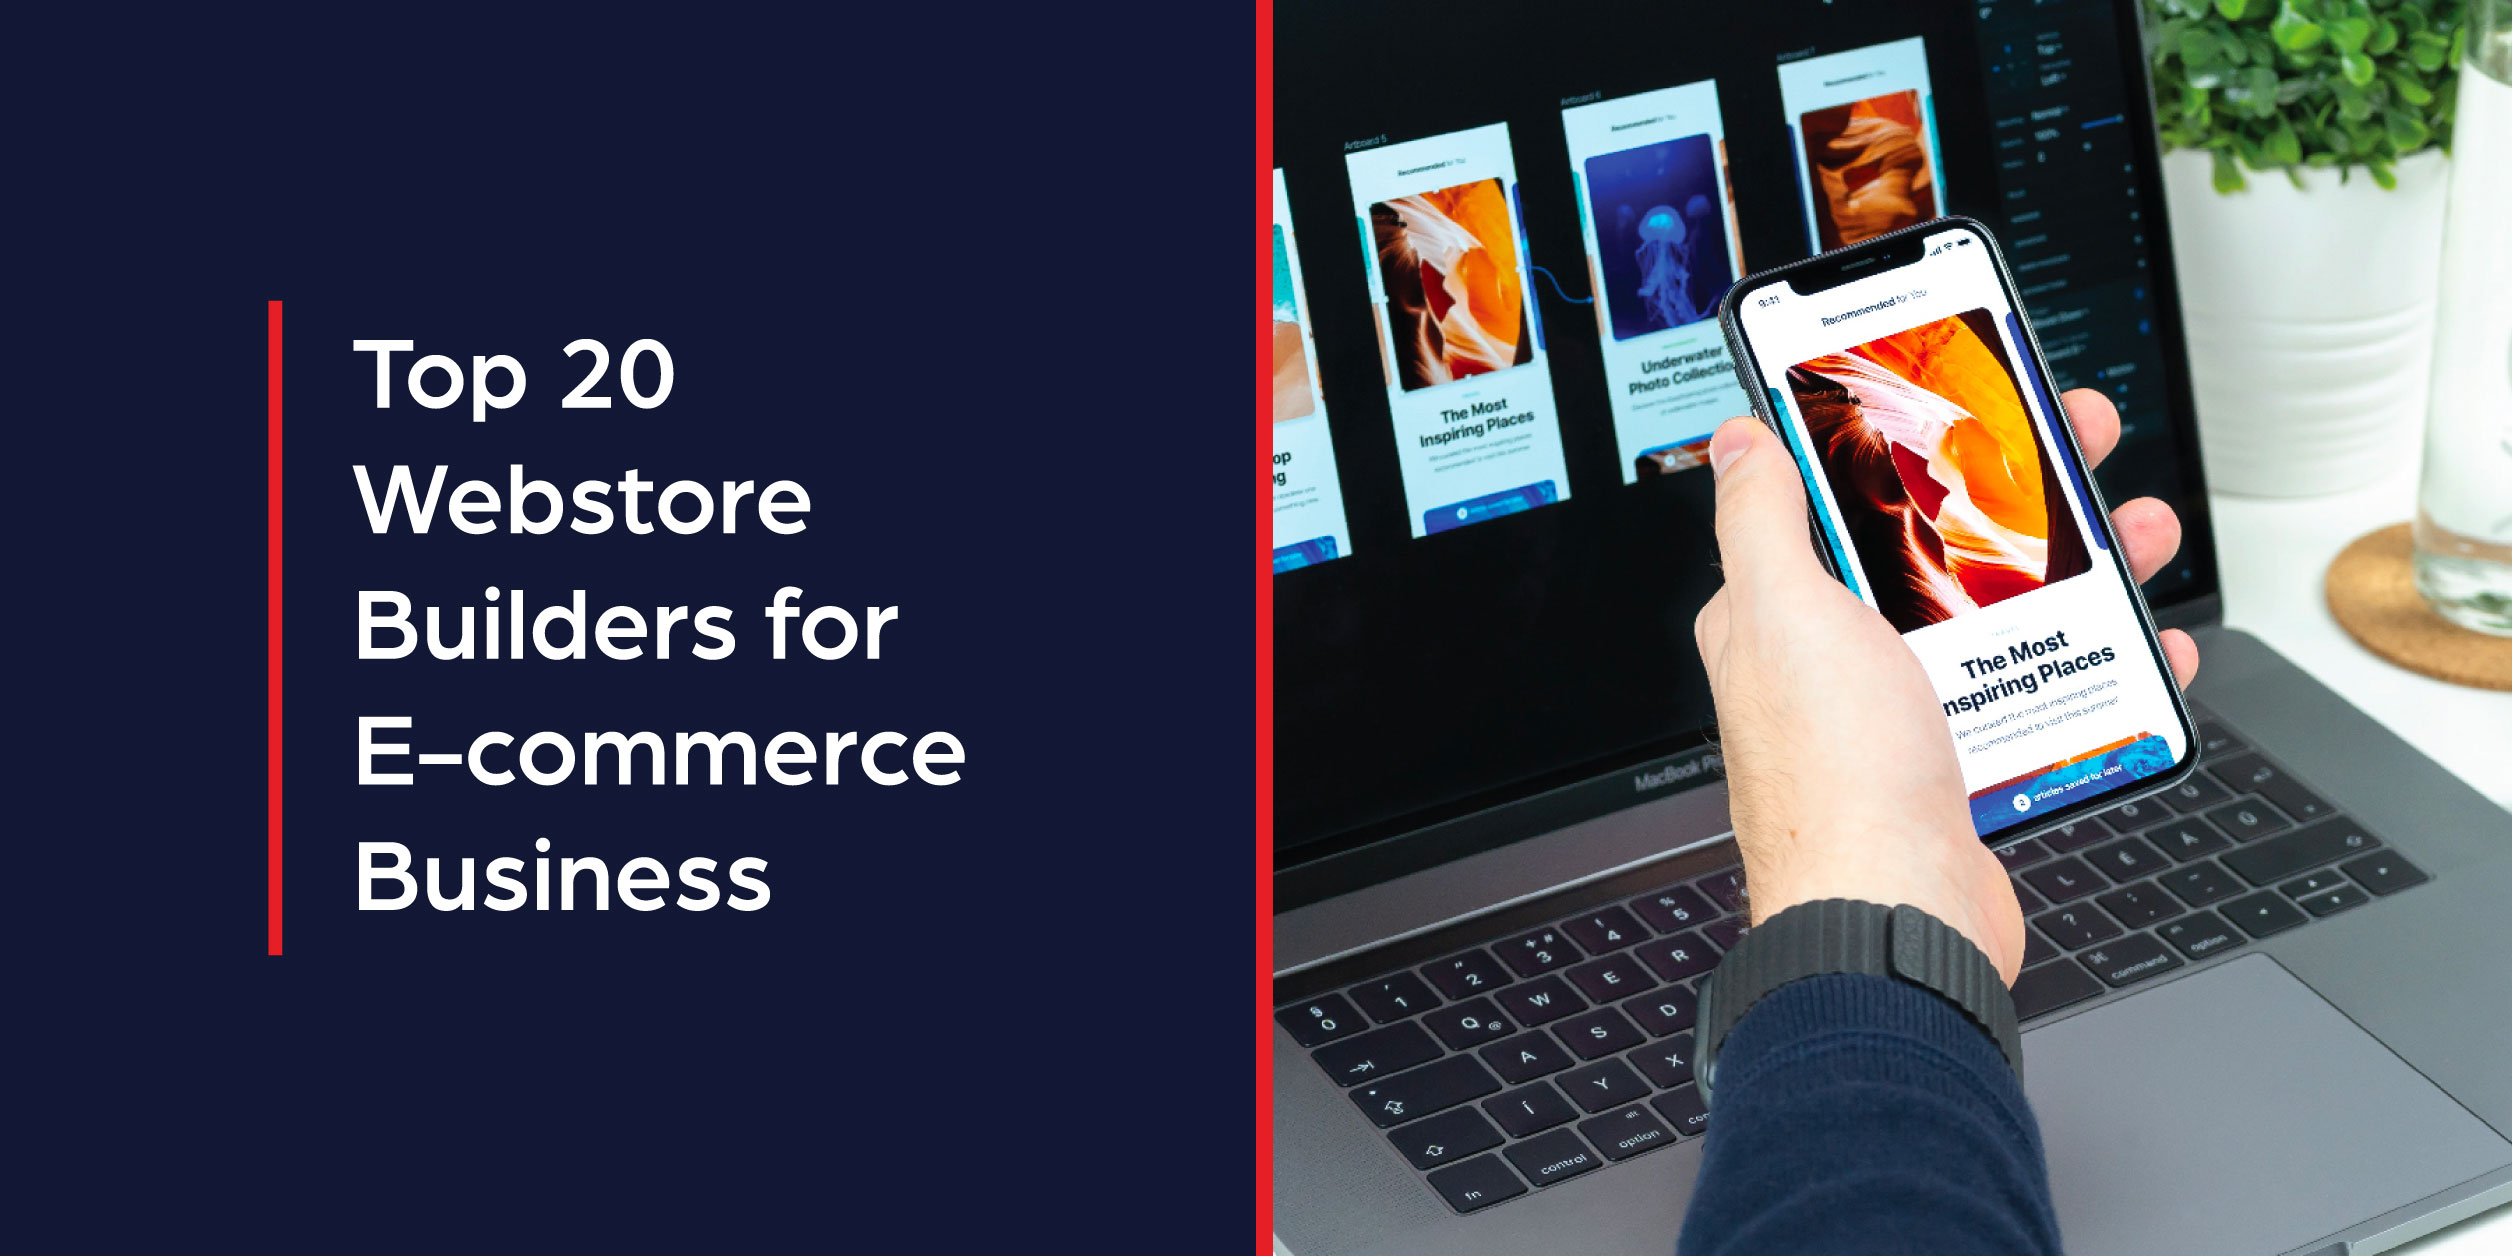 Top 10 Webstore Builders for E-commerce Businesses